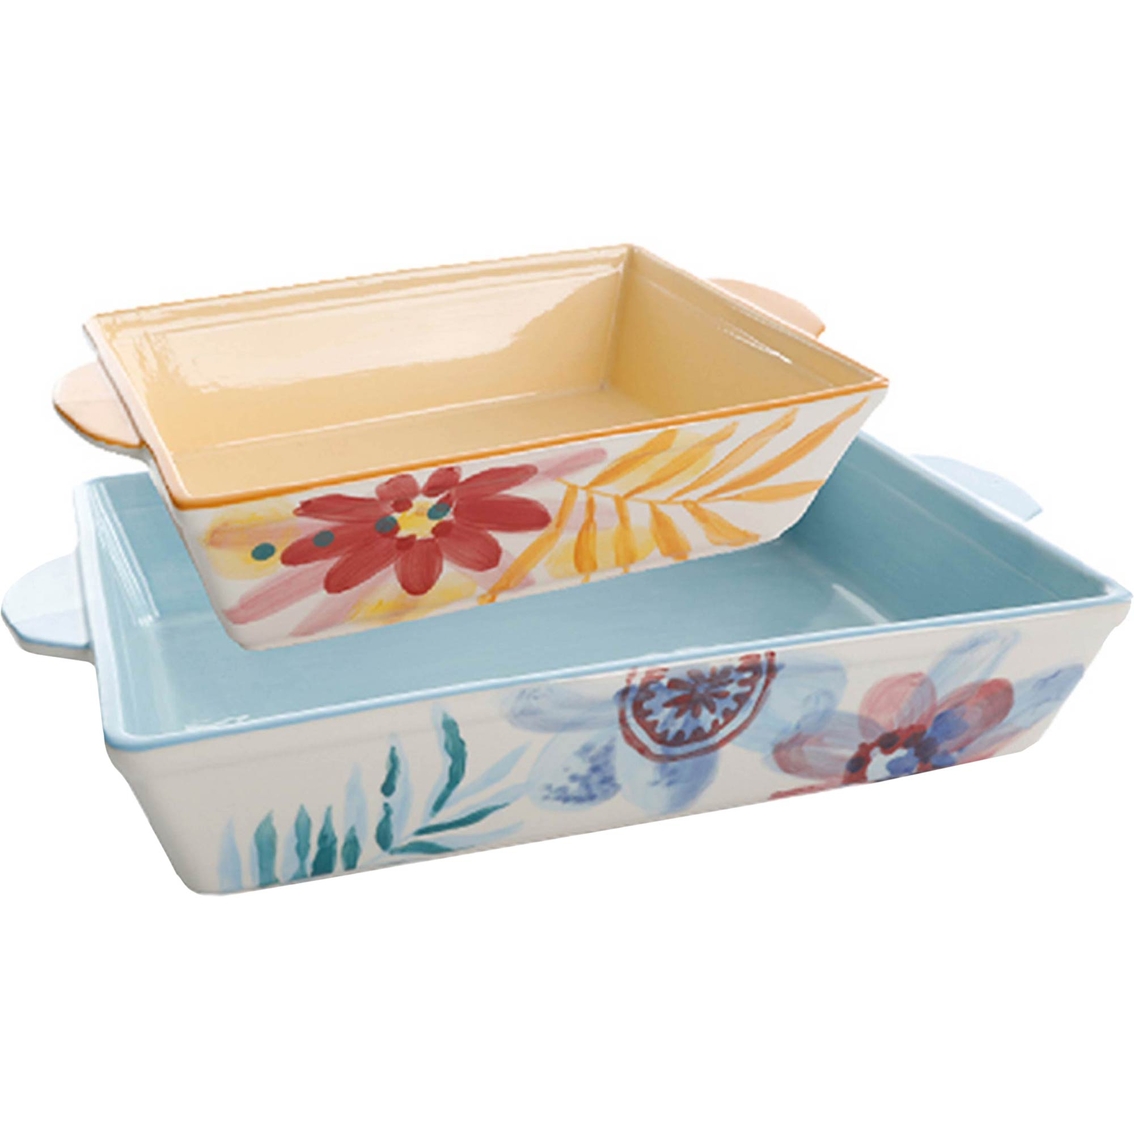 Spice By Tia Mowry Goji Blossom Bakeware 2 Pc. Set, Baking Pans, Household